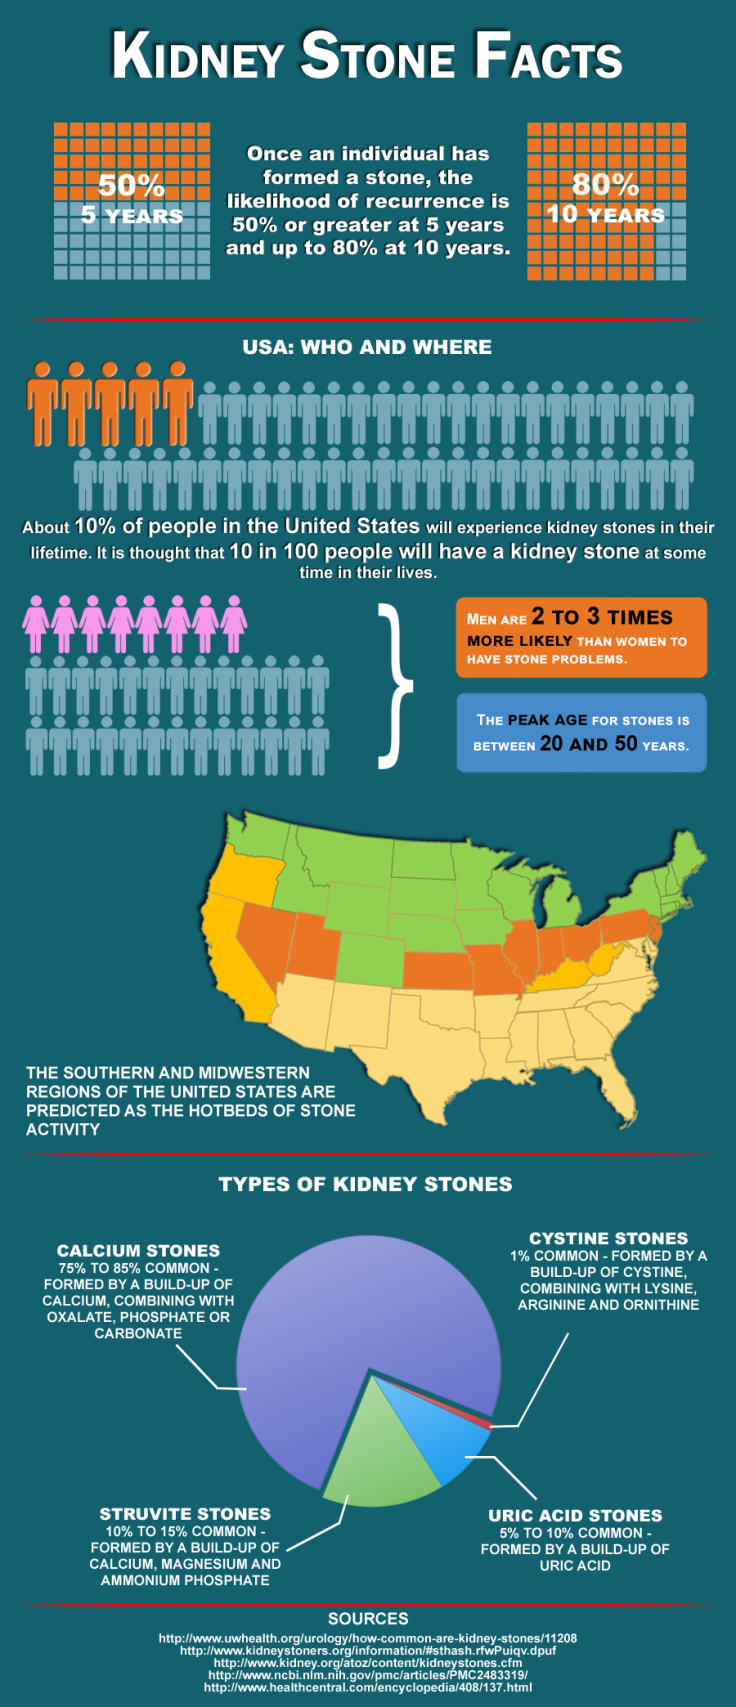 Once an individual has formed a stone, the likelihood of recurrence is 50% or greater at 5 years and up to 80% at 10 years. About 10% of people in the United States will experience kidney stones in their lifetime. lt is thought that 10 in 100 people will 